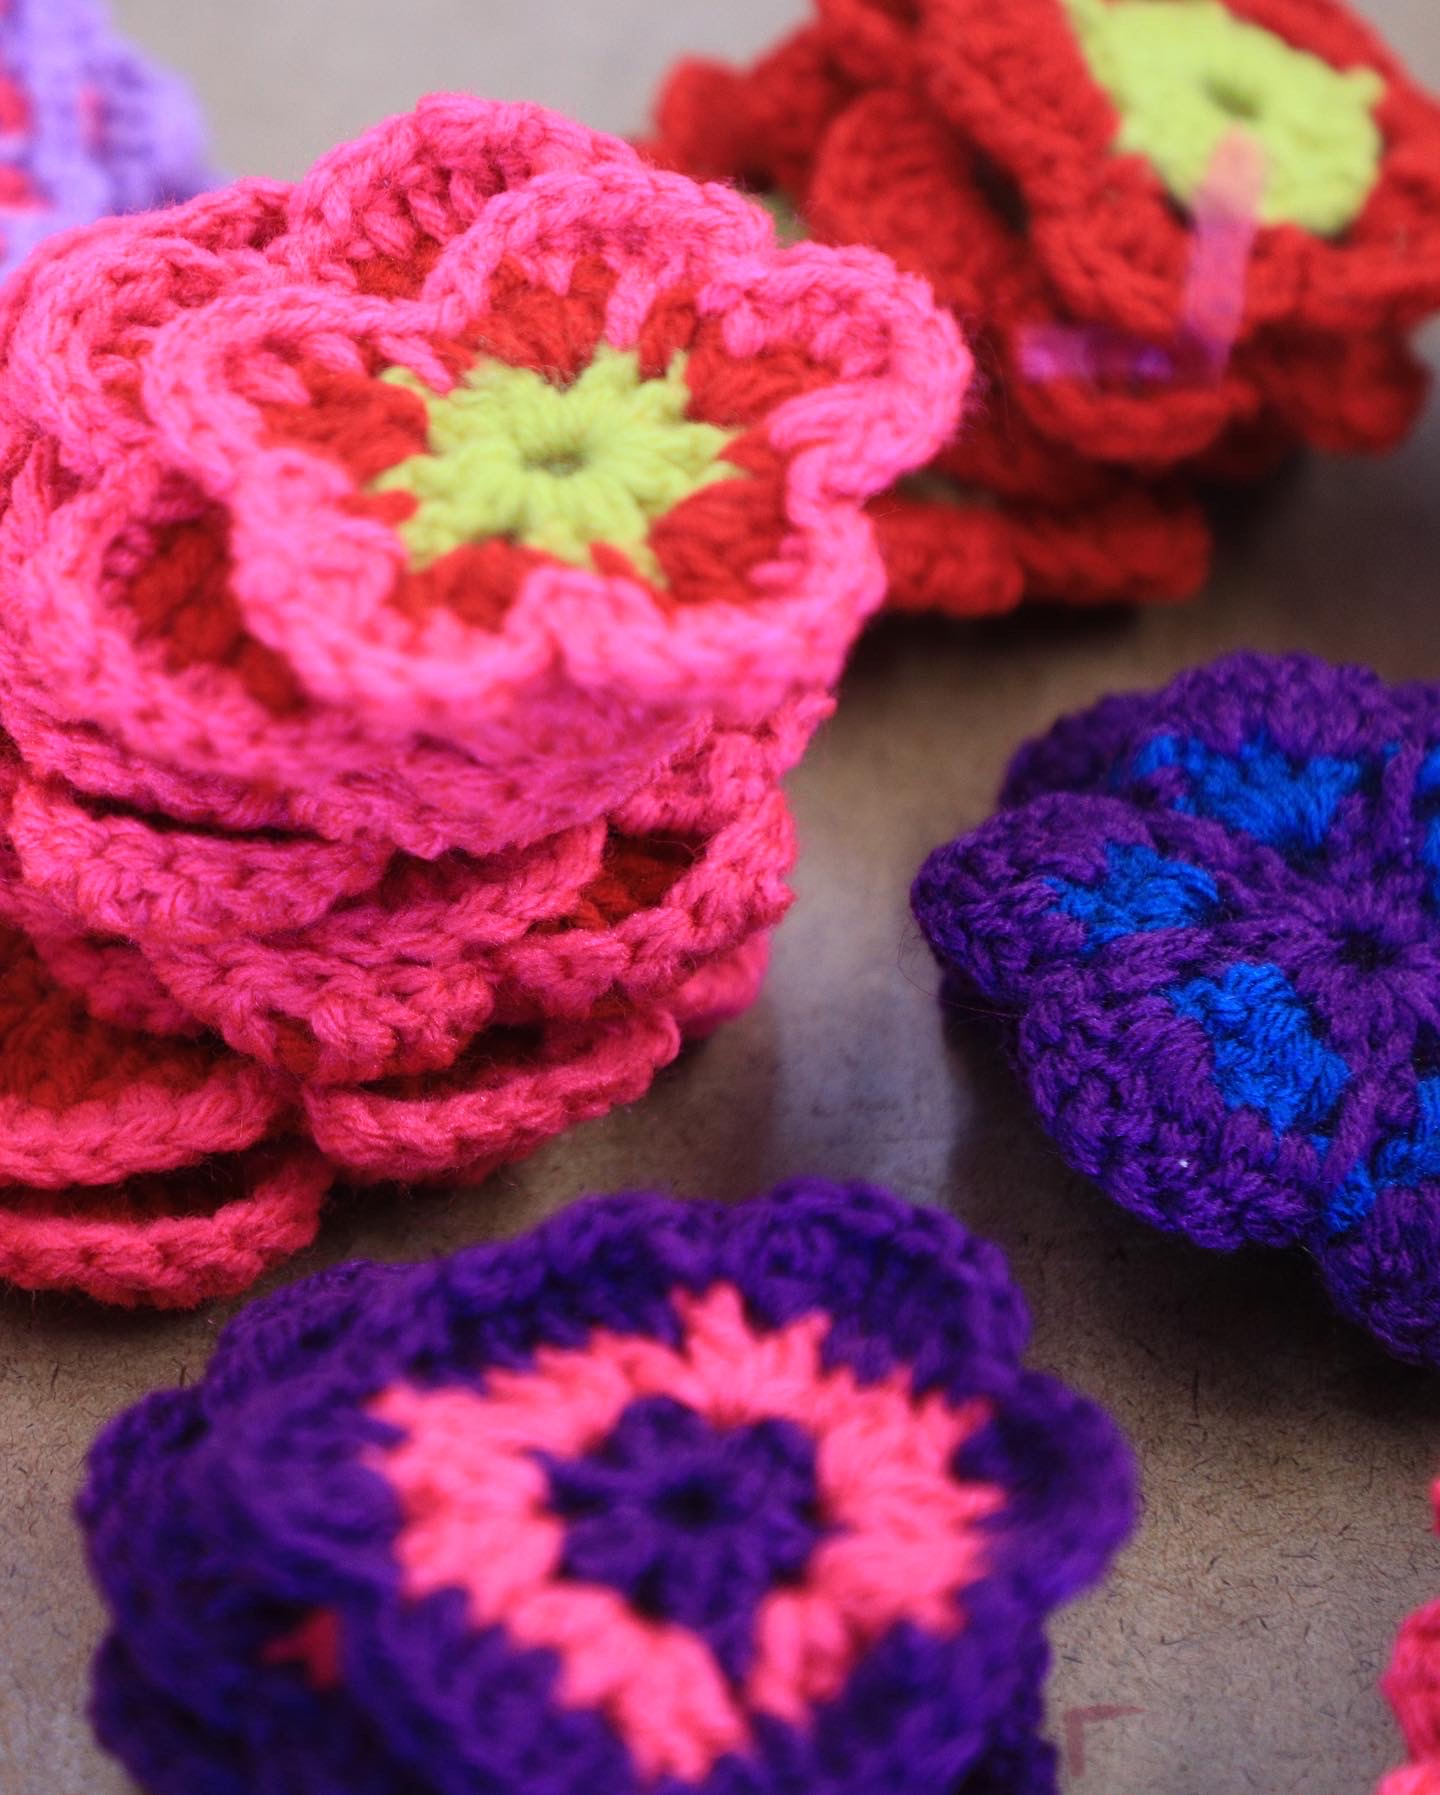 crocheted flowers designed by Sofia Masuda, in bright orange, pink, blue, and yellow